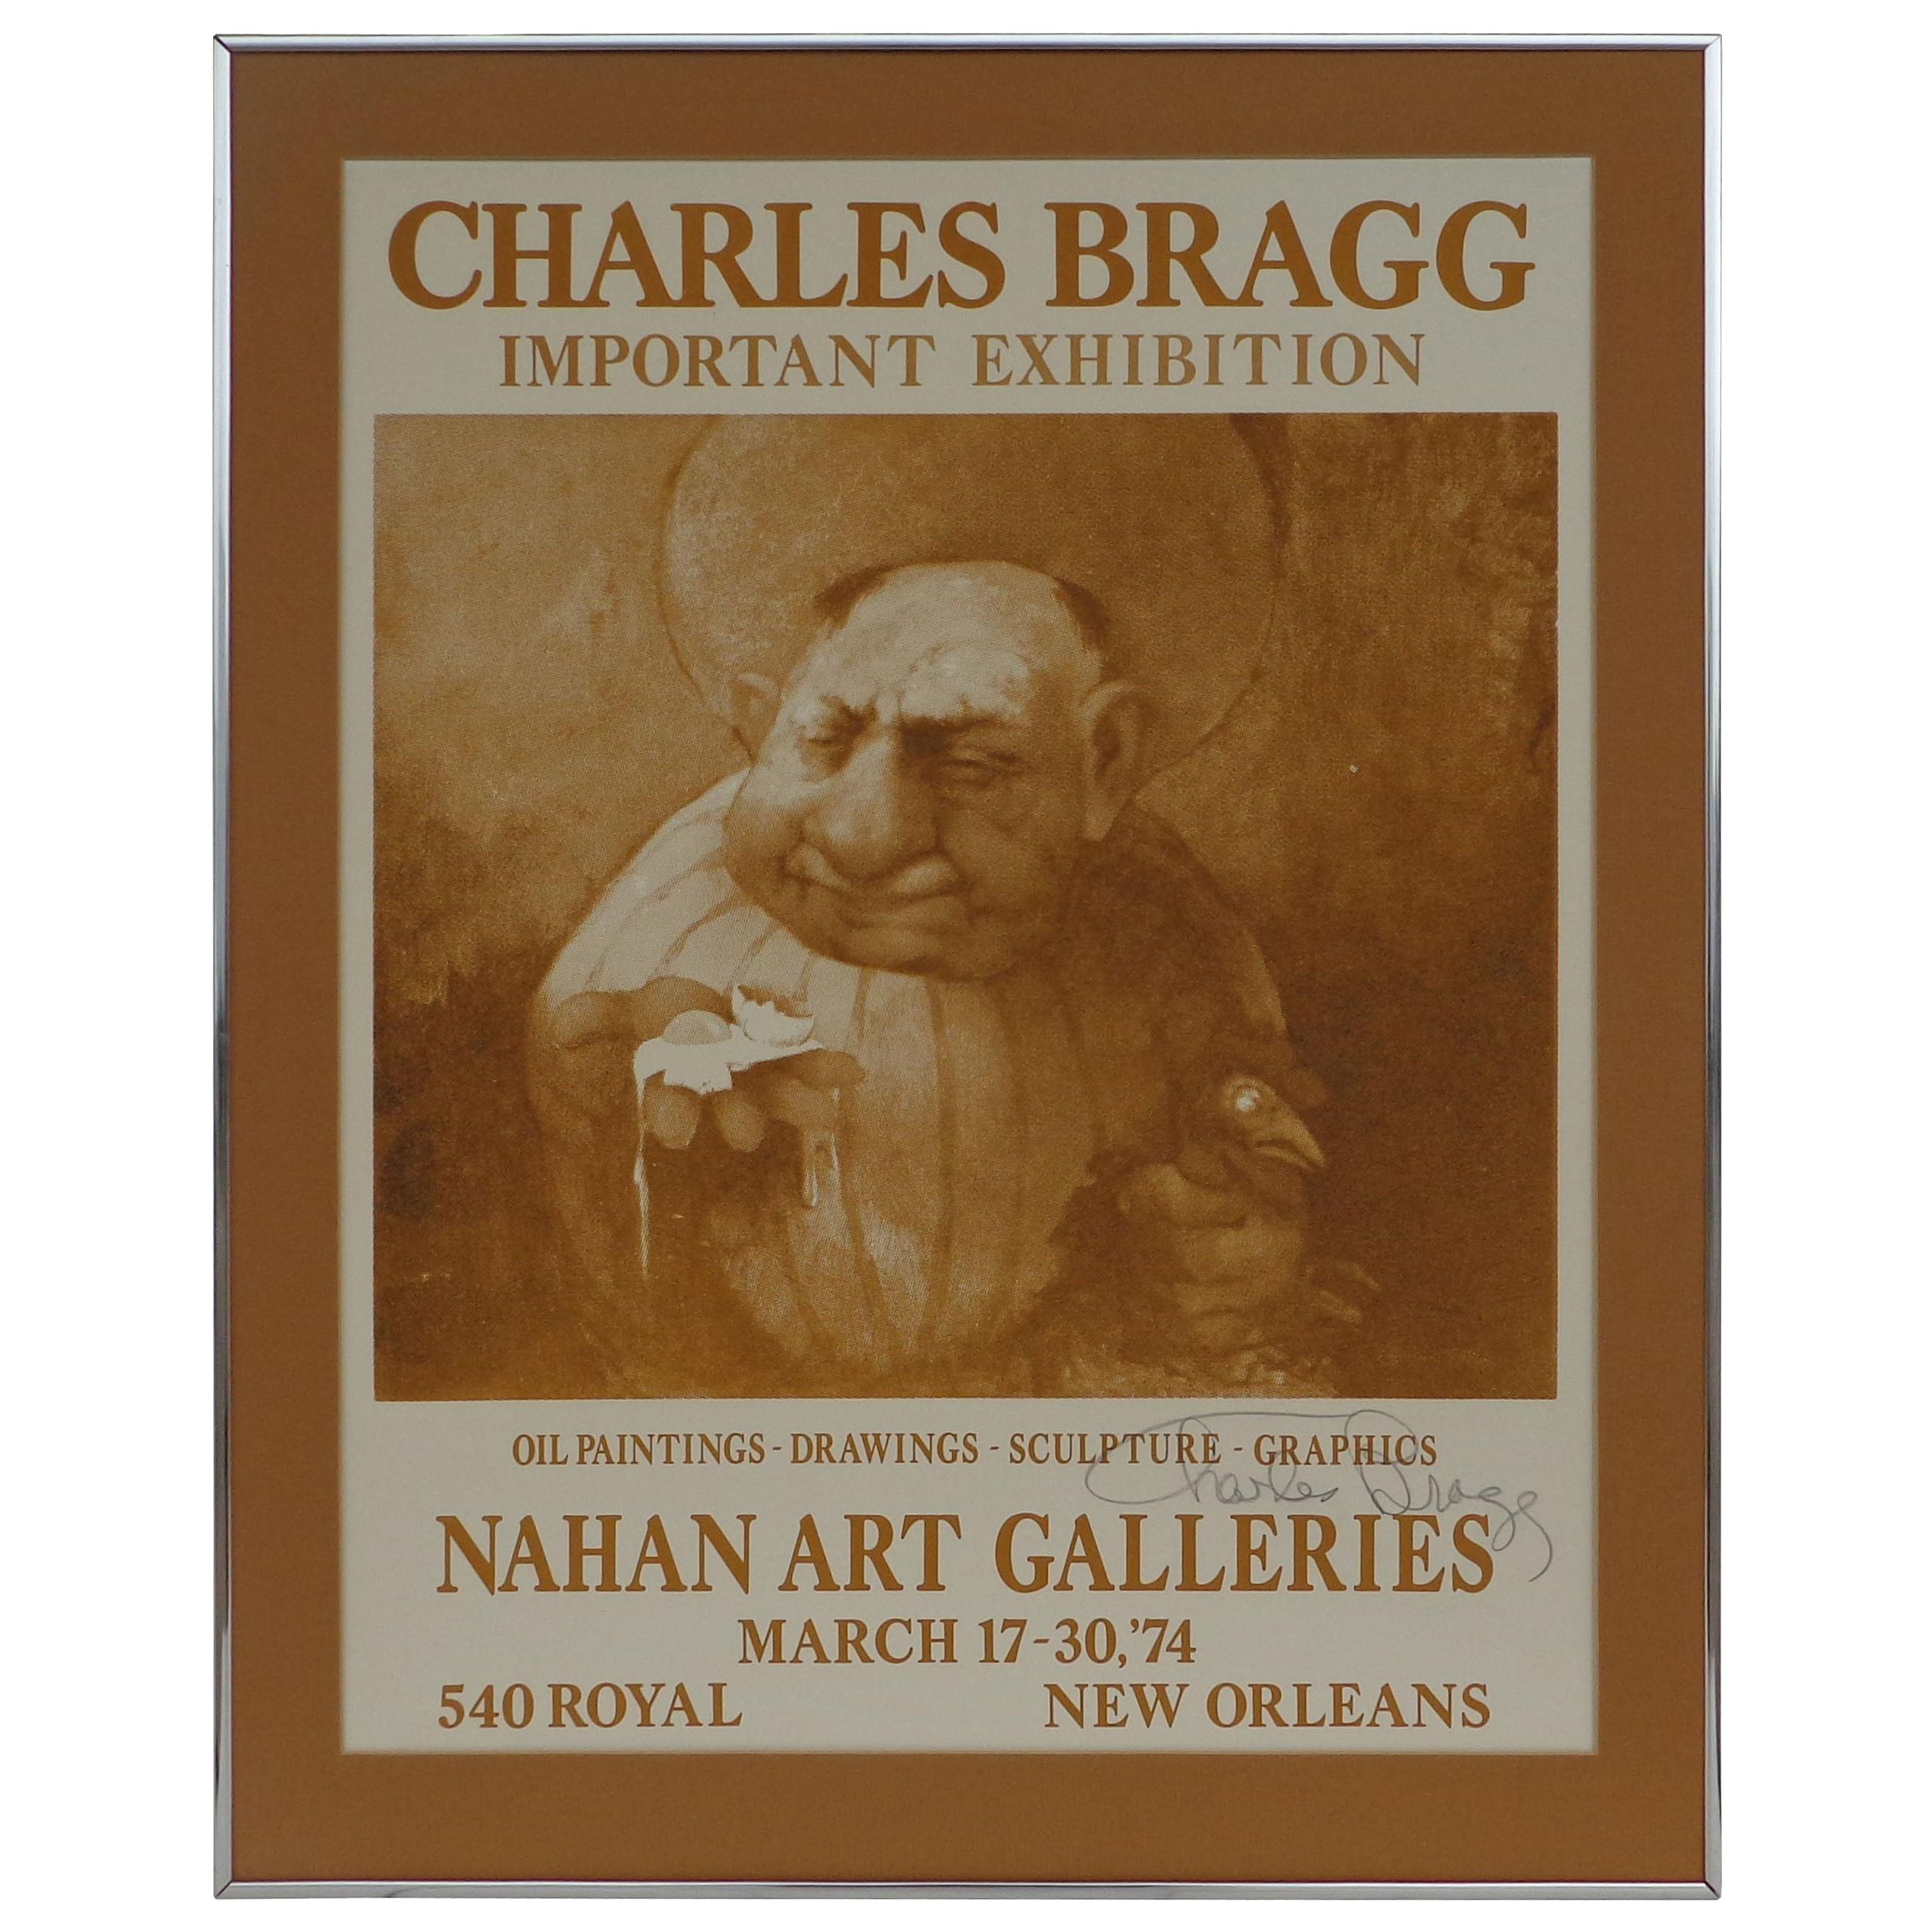 Signiertes 1974 Charles Bragg New Orleans „“Important Exhibition“-Poster